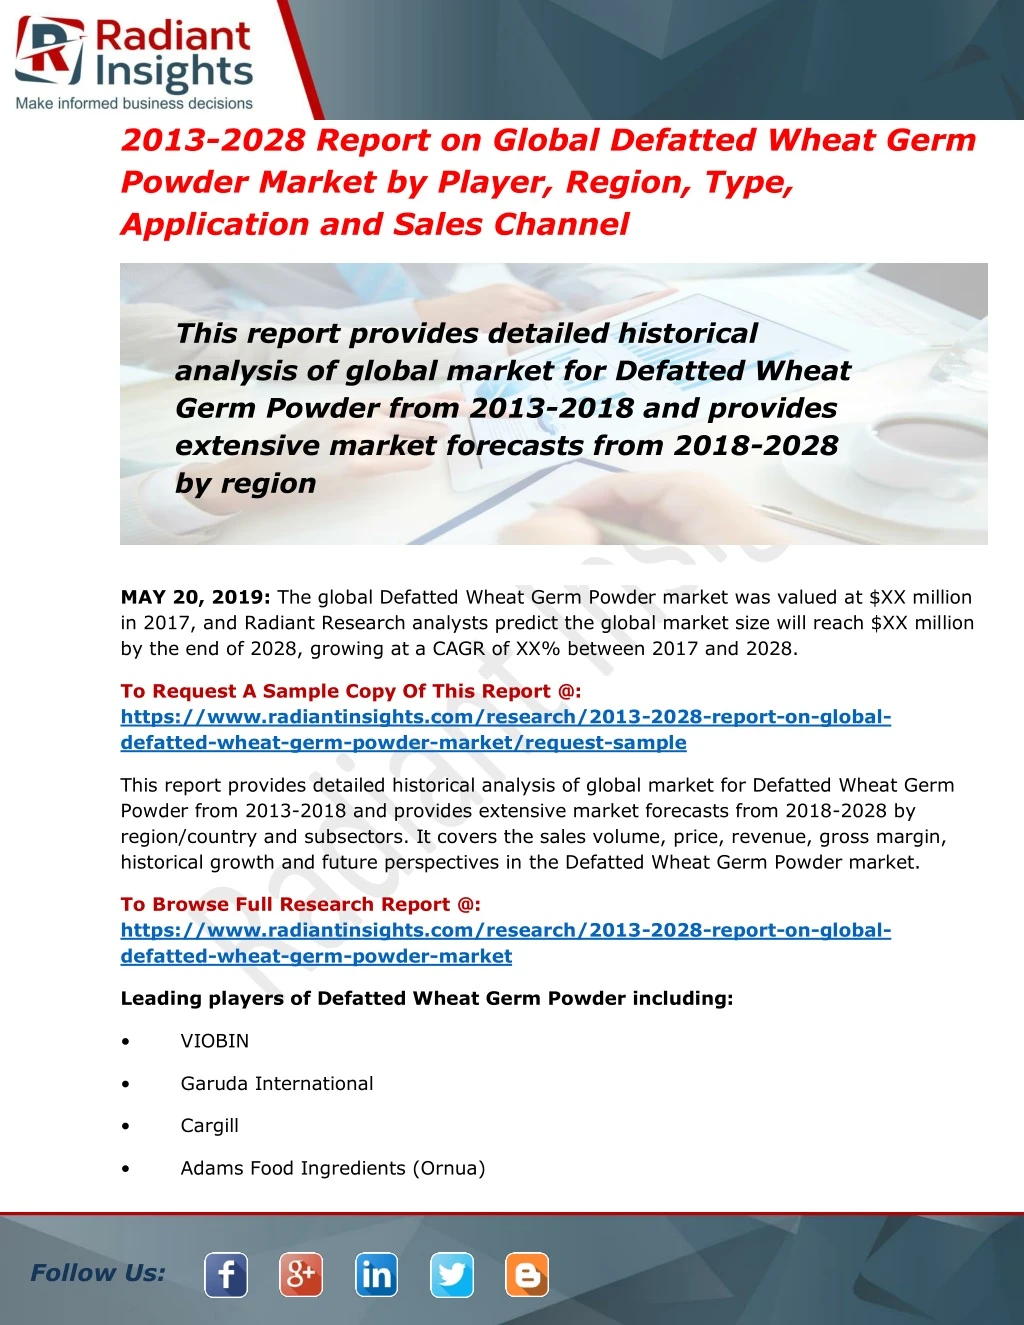 2013 2028 report on global defatted wheat germ